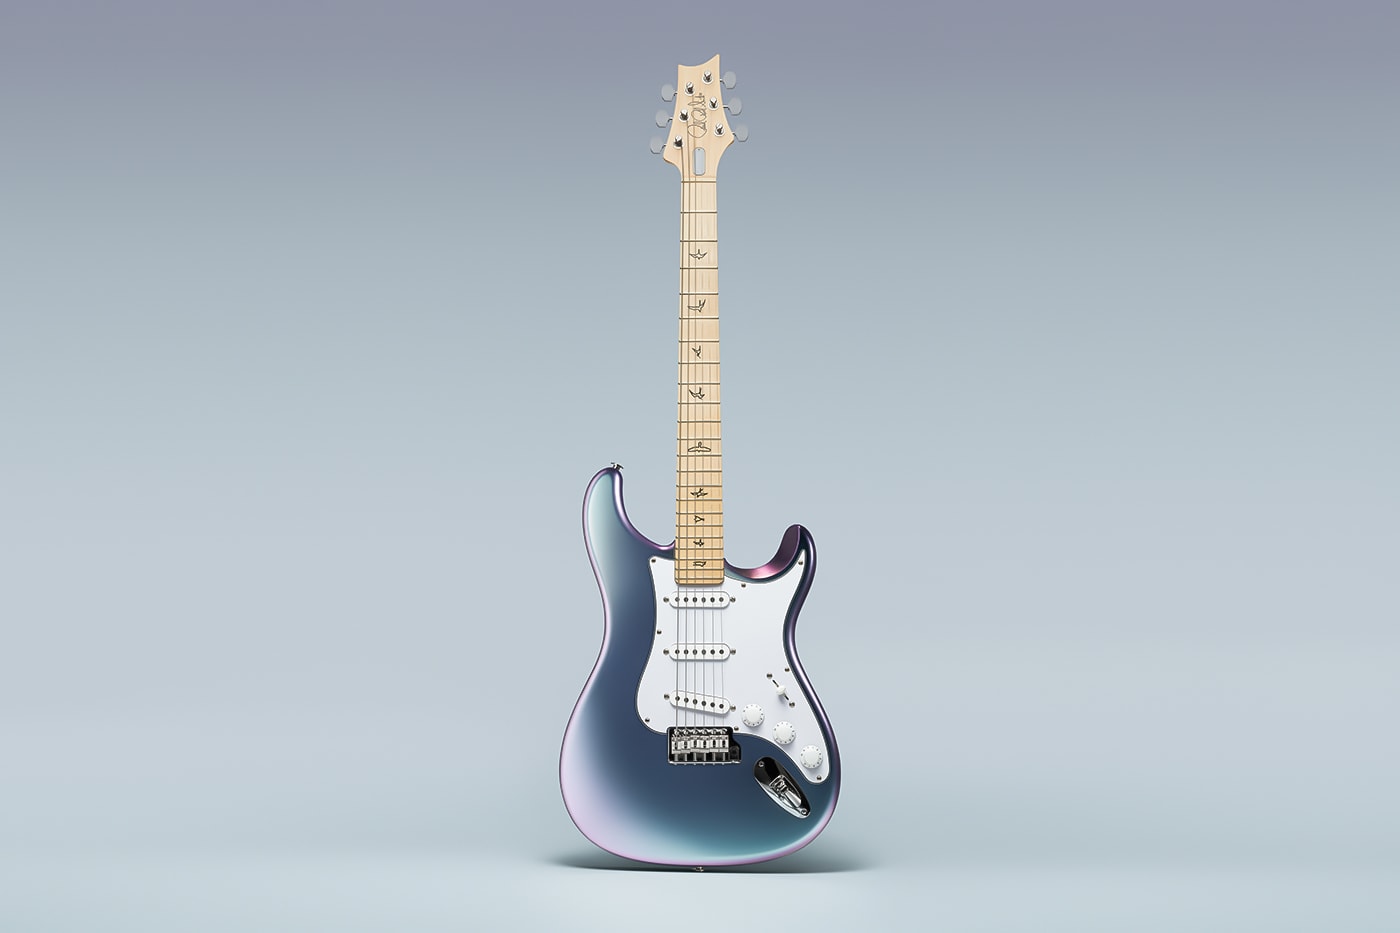 https%3A%2F%2Fhypebeast.com%2Fimage%2F2021%2F01%2Fjohn-mayer-prs-guitars-silver-sky-guitar-limited-edition-release-info-001.jpg